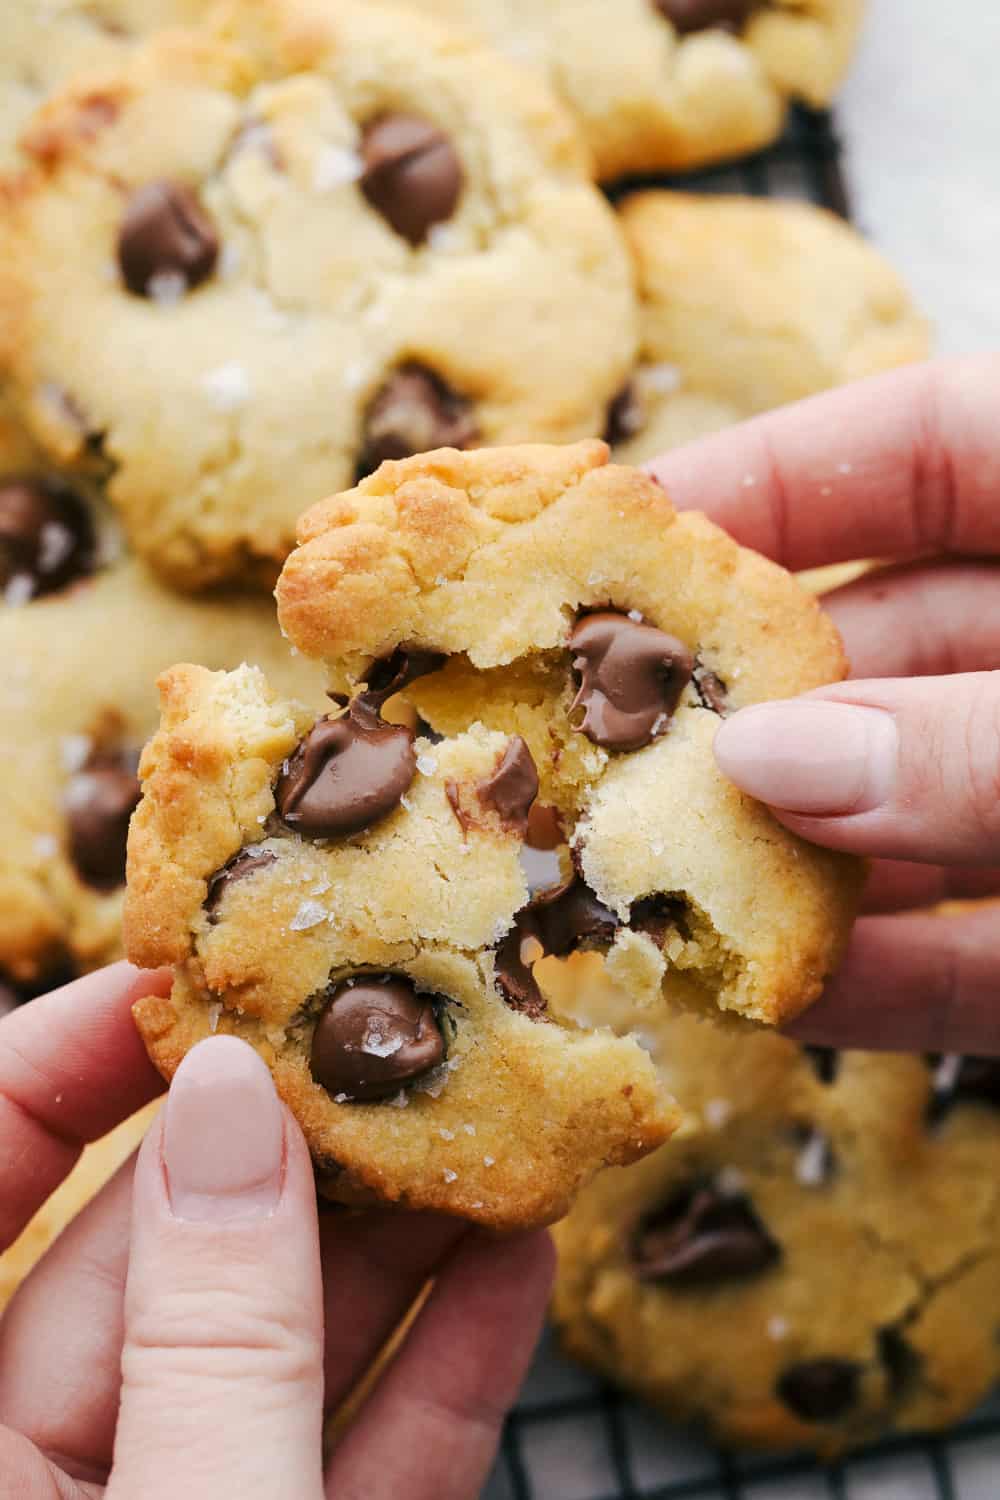 Breaking apart a cookie with melting chocolate. 